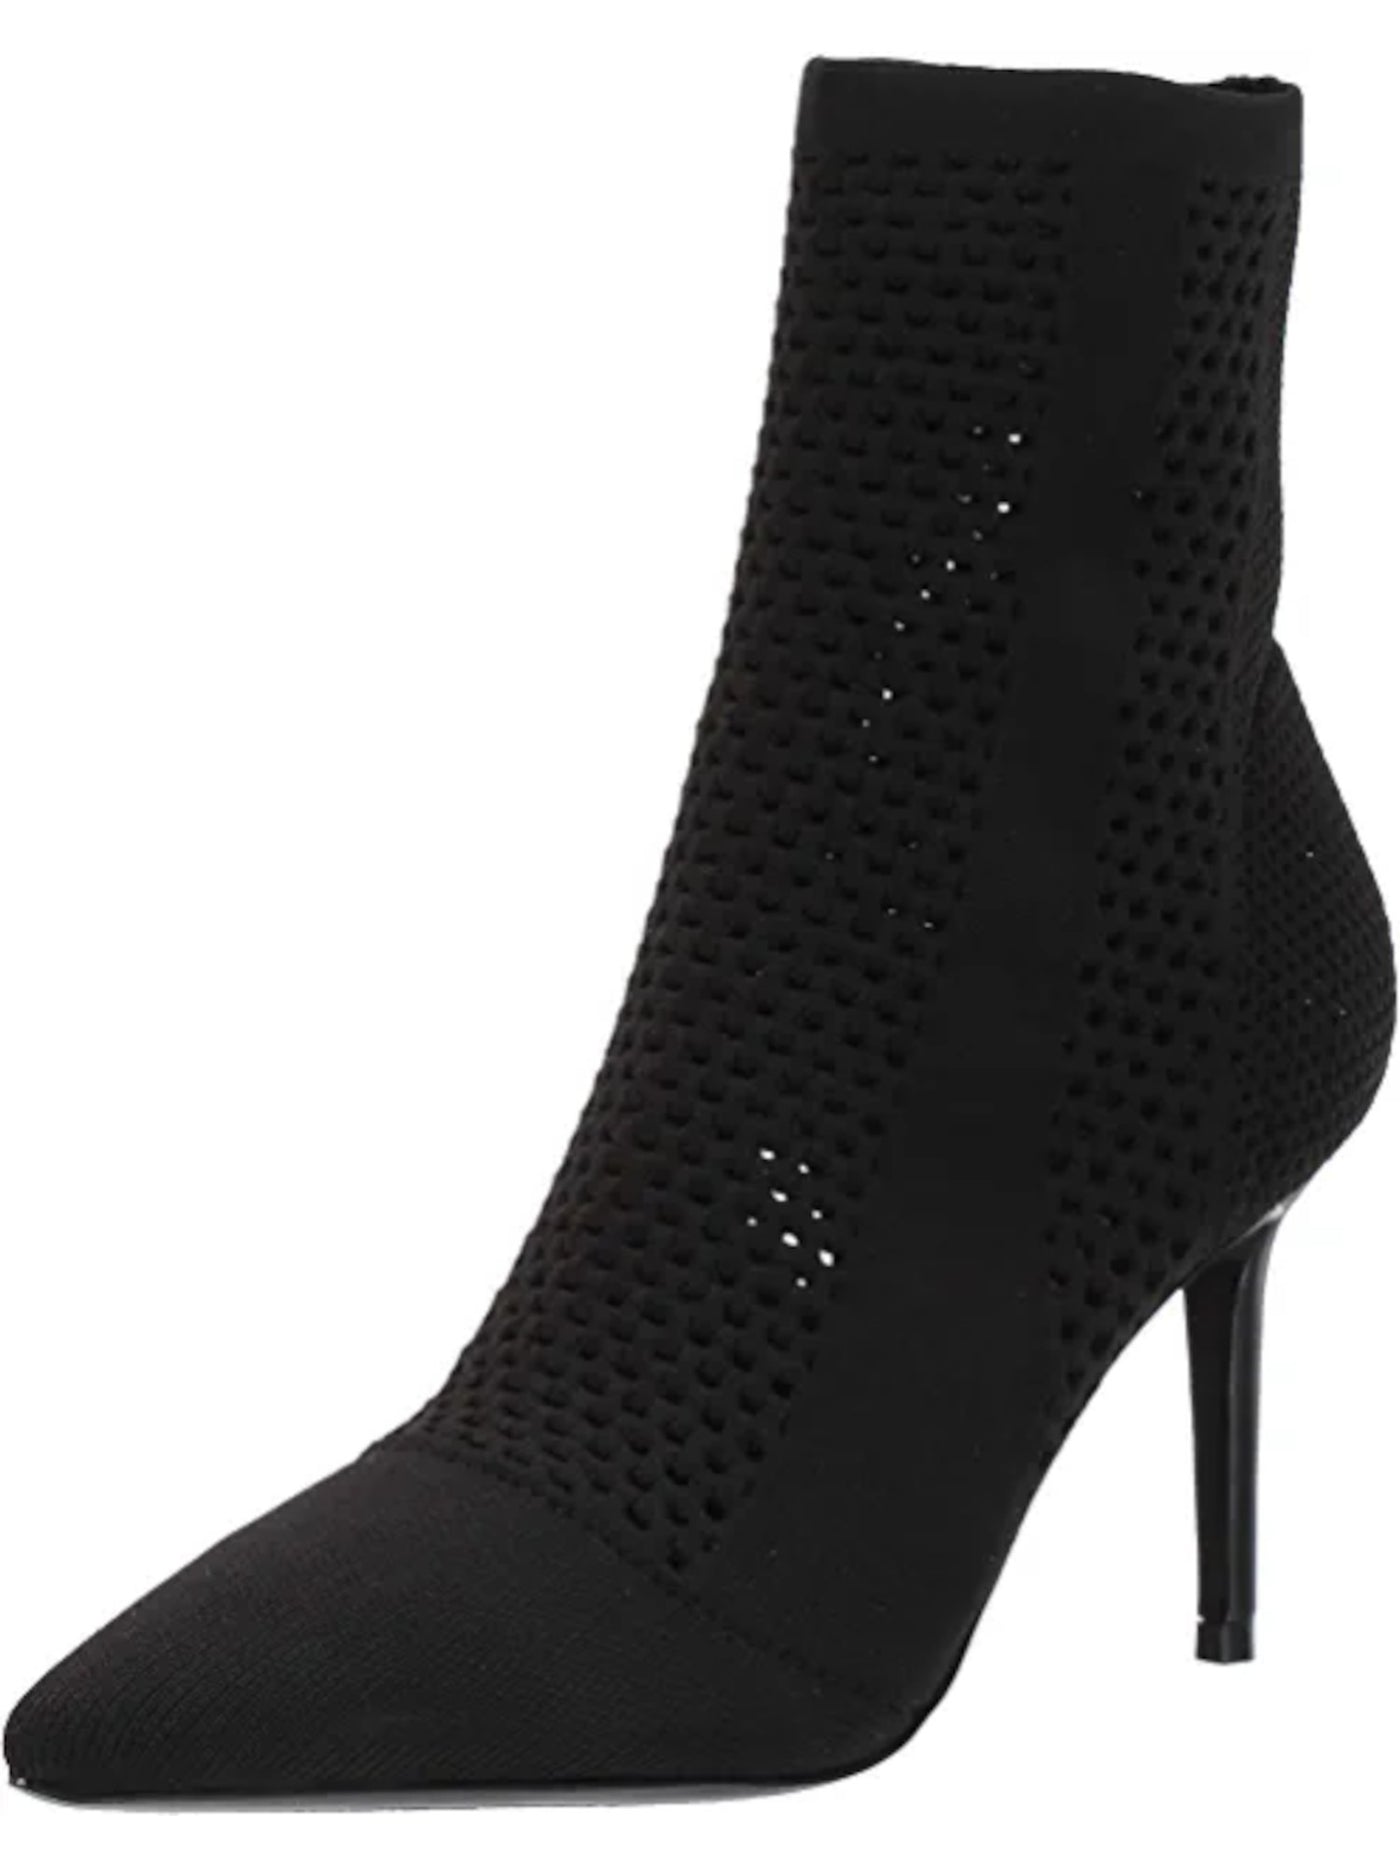 CHARLES BY CHARLES DAVID Womens Black Patterned Perforated Stretch Venus Pointed Toe Stiletto Heeled Boots 7.5 M